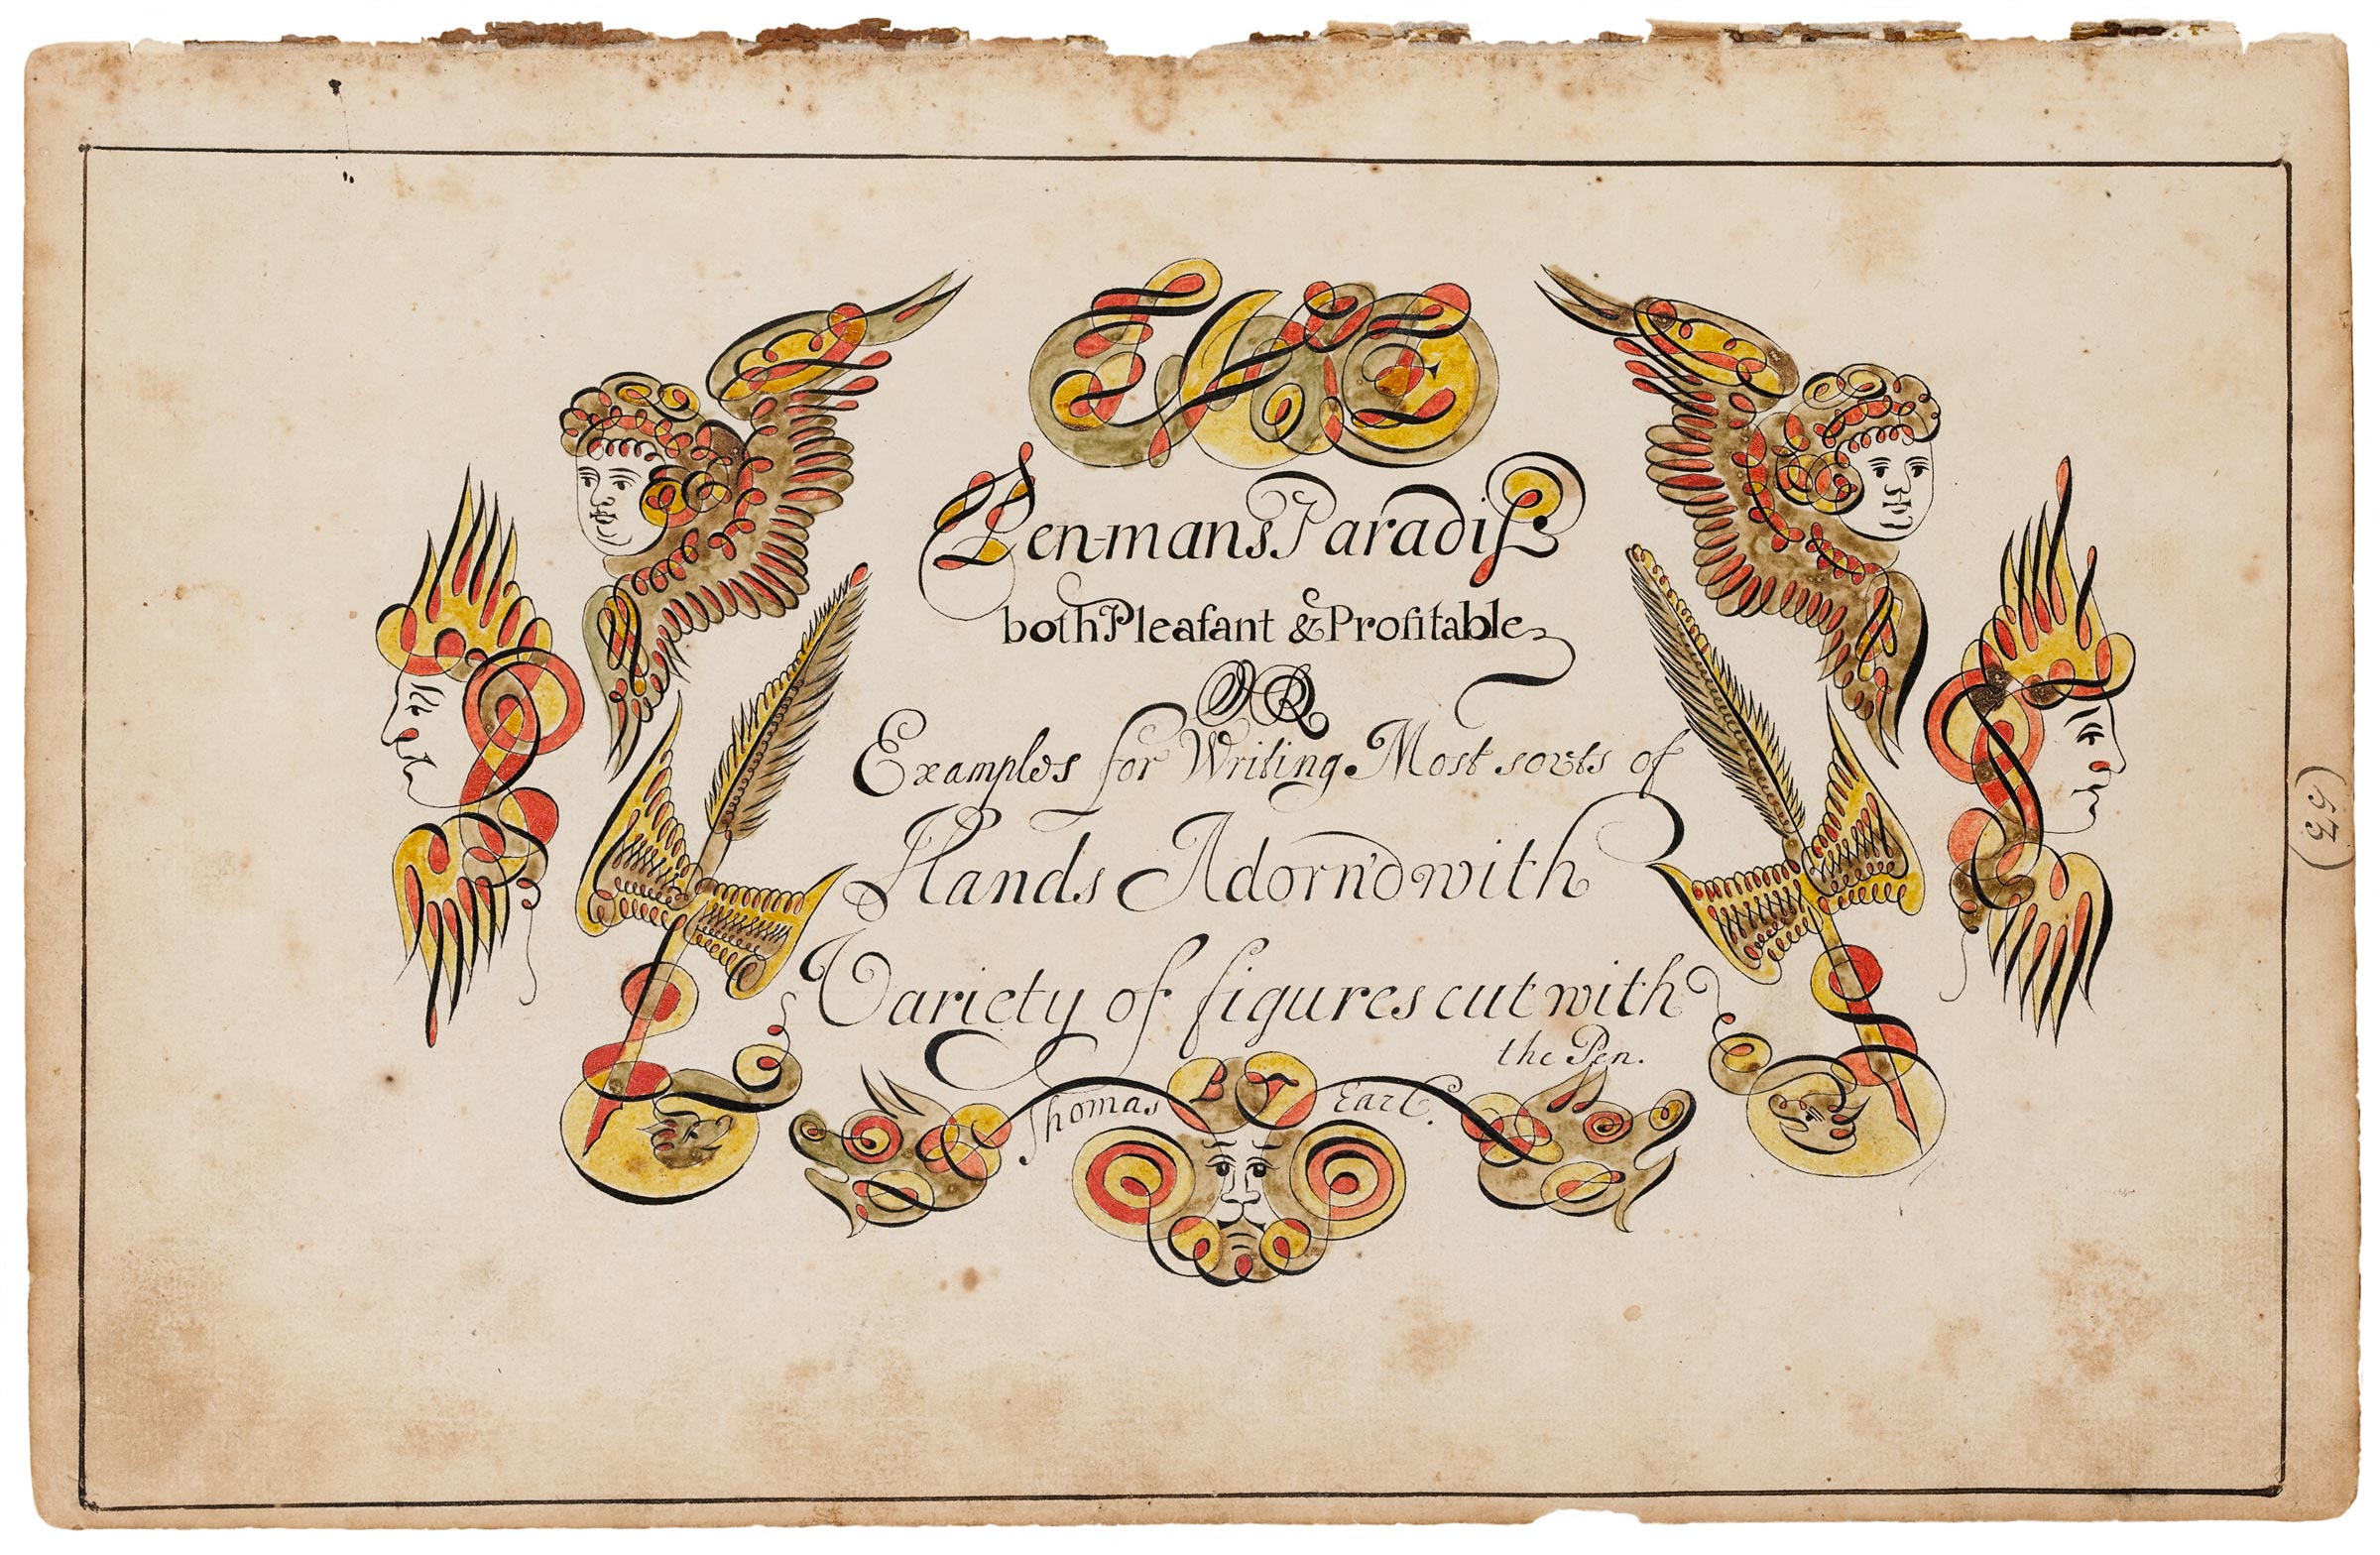 Thomas Earl, Penman’s Paradise both Pleasant and Profitable, from his 1740/41 copybook